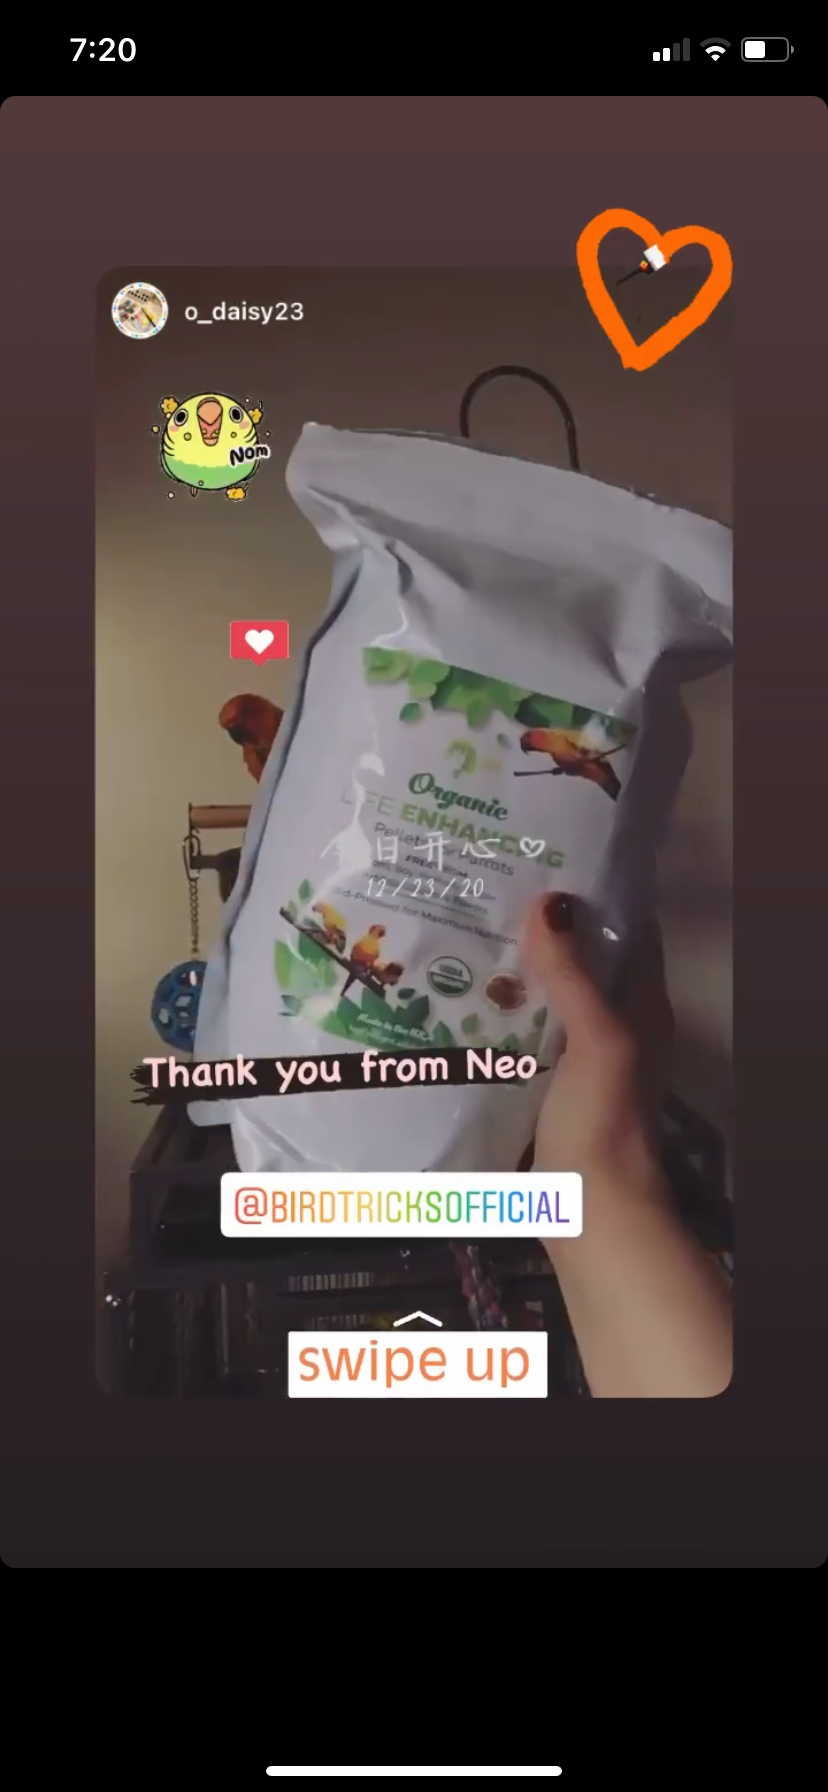 The Parrot Natural Nutrition Course